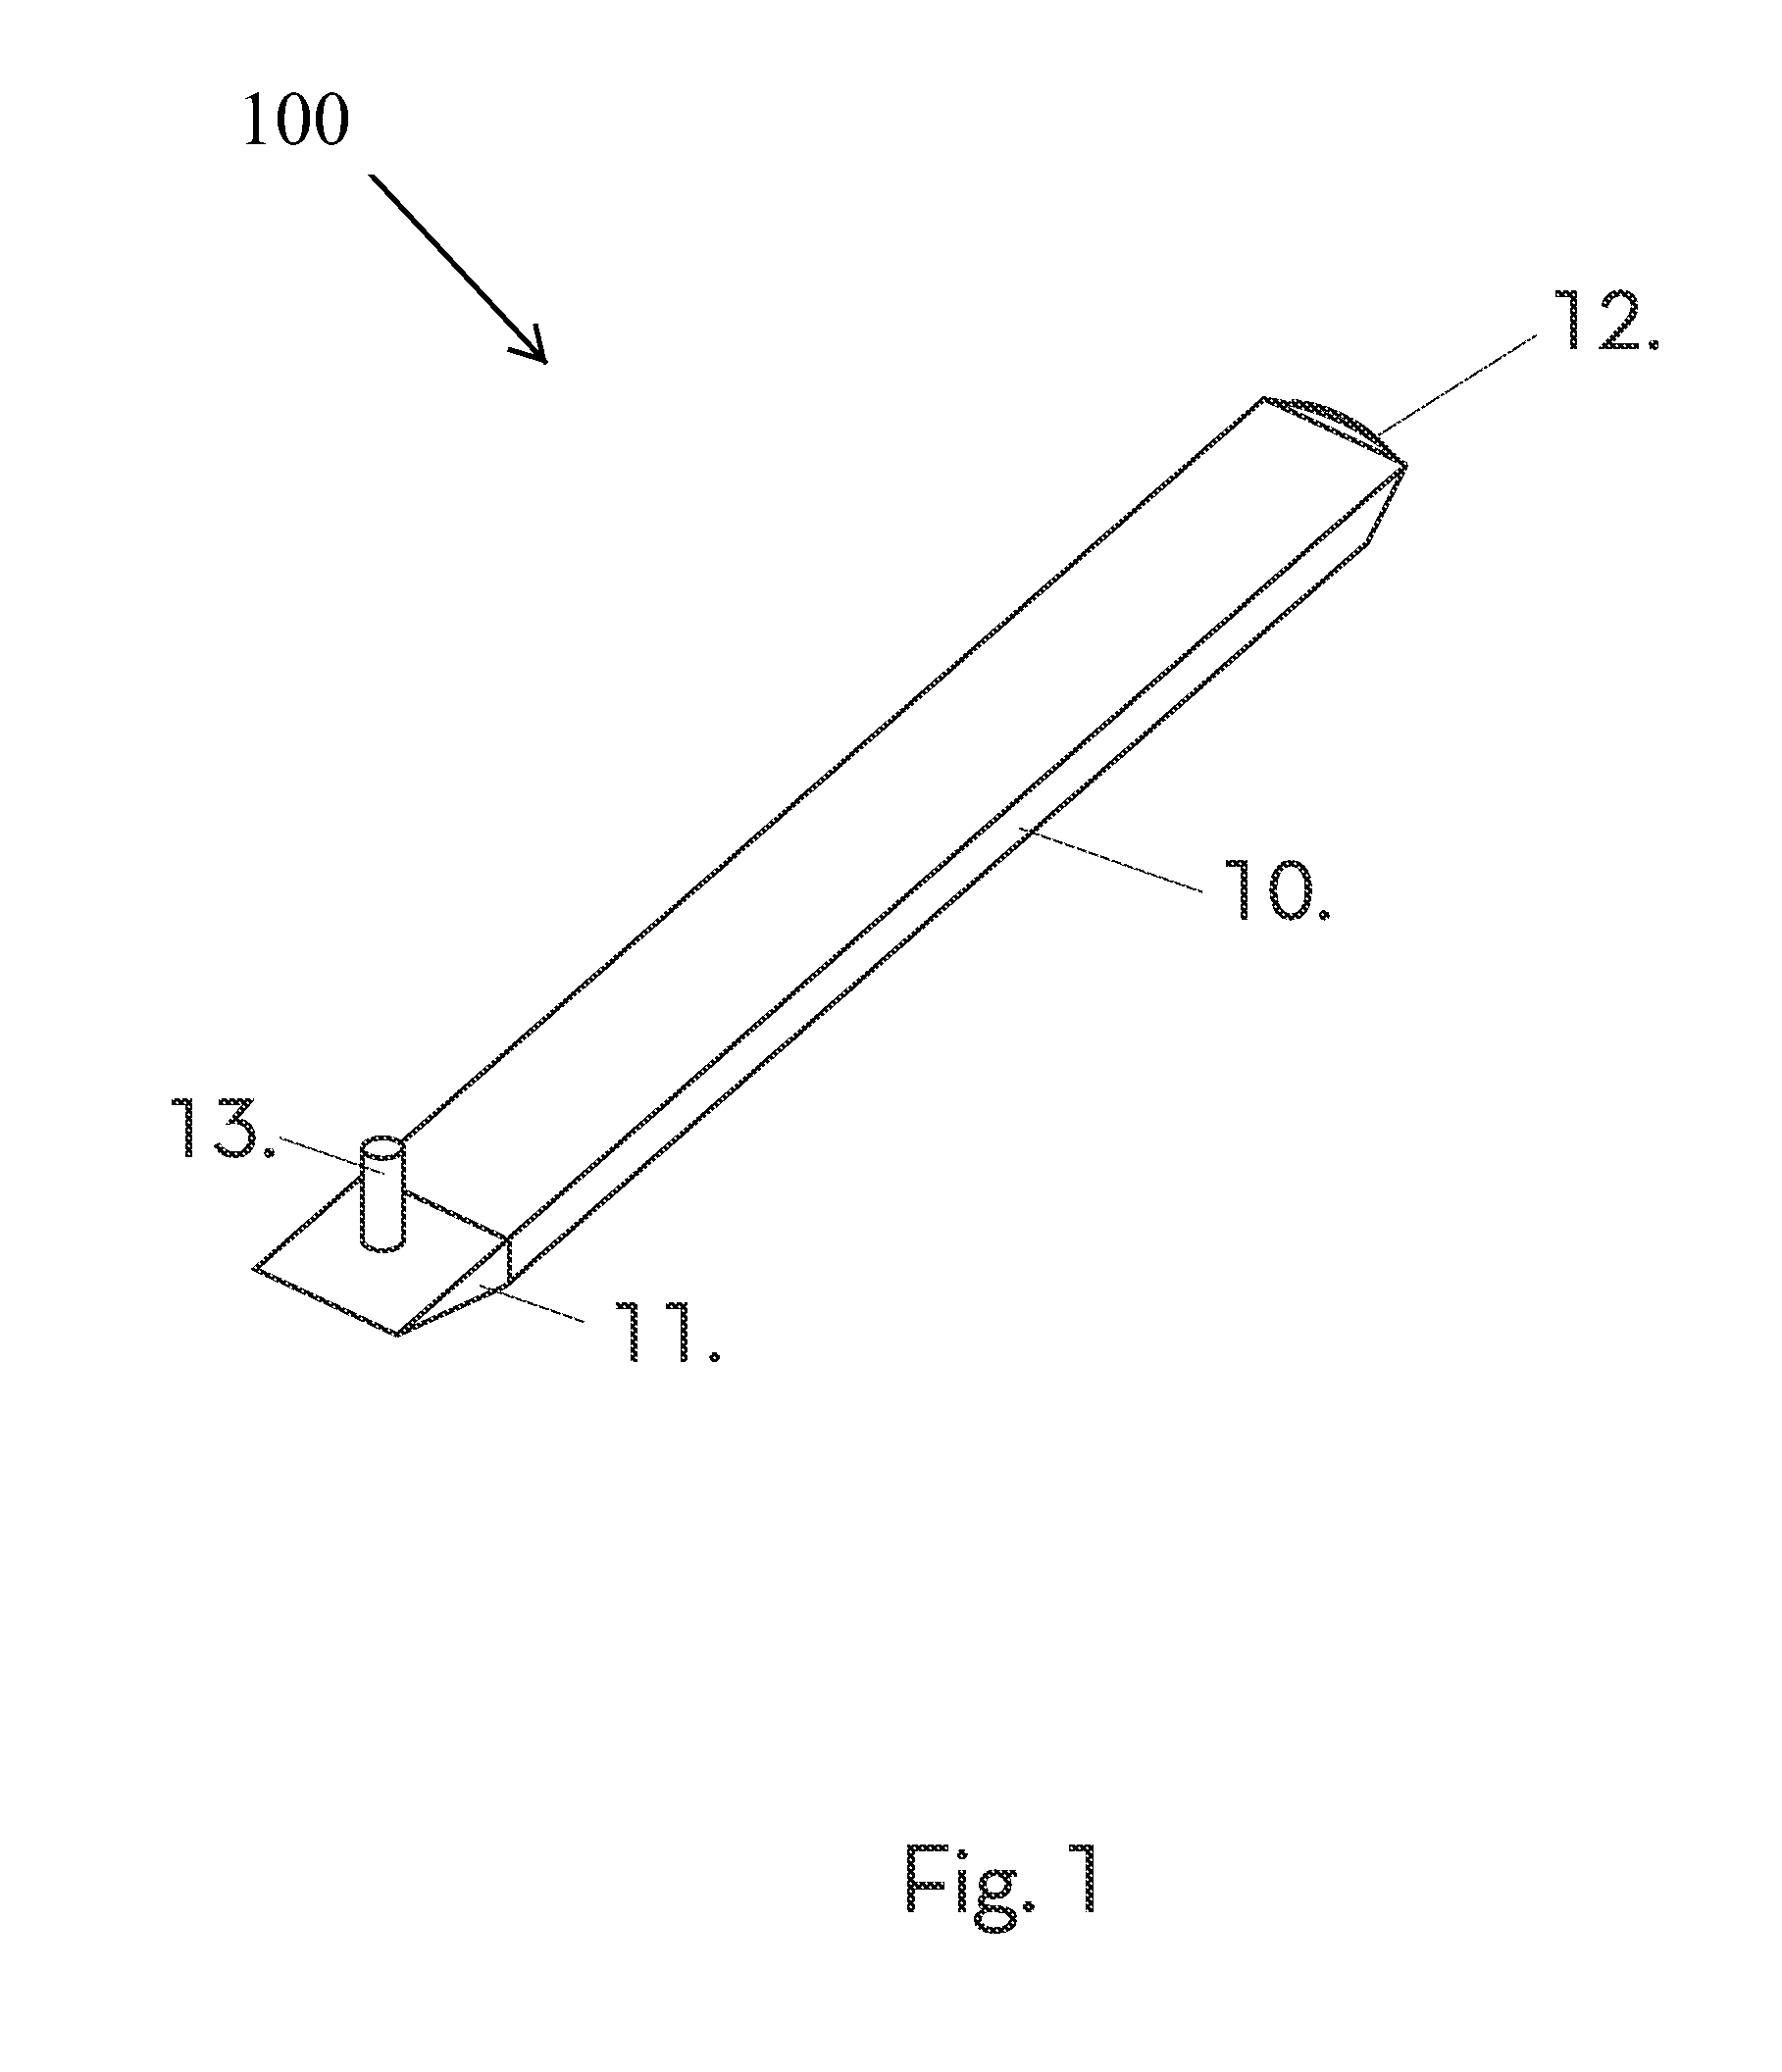 Thermoplastic mandrels for composite fabrication